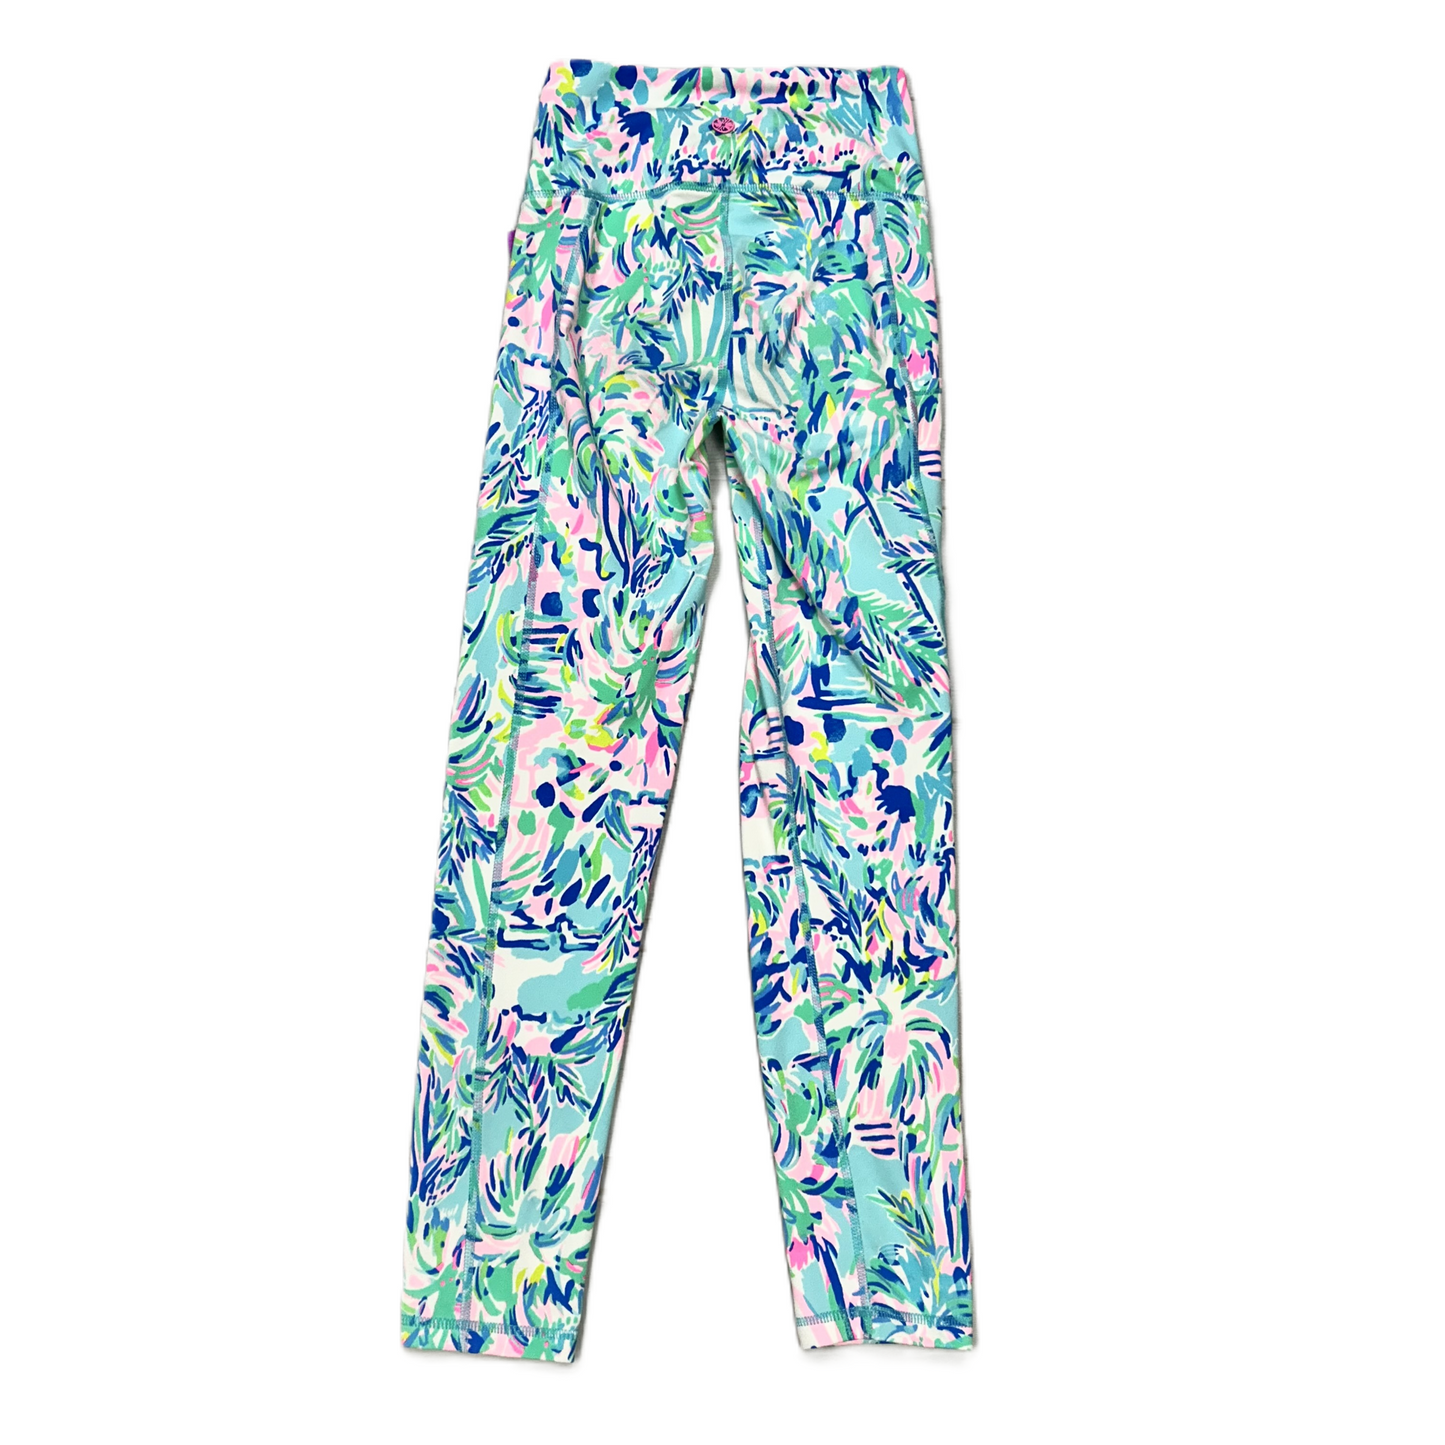 Blue & Pink Pants Designer By Lilly Pulitzer, Size: Xxs